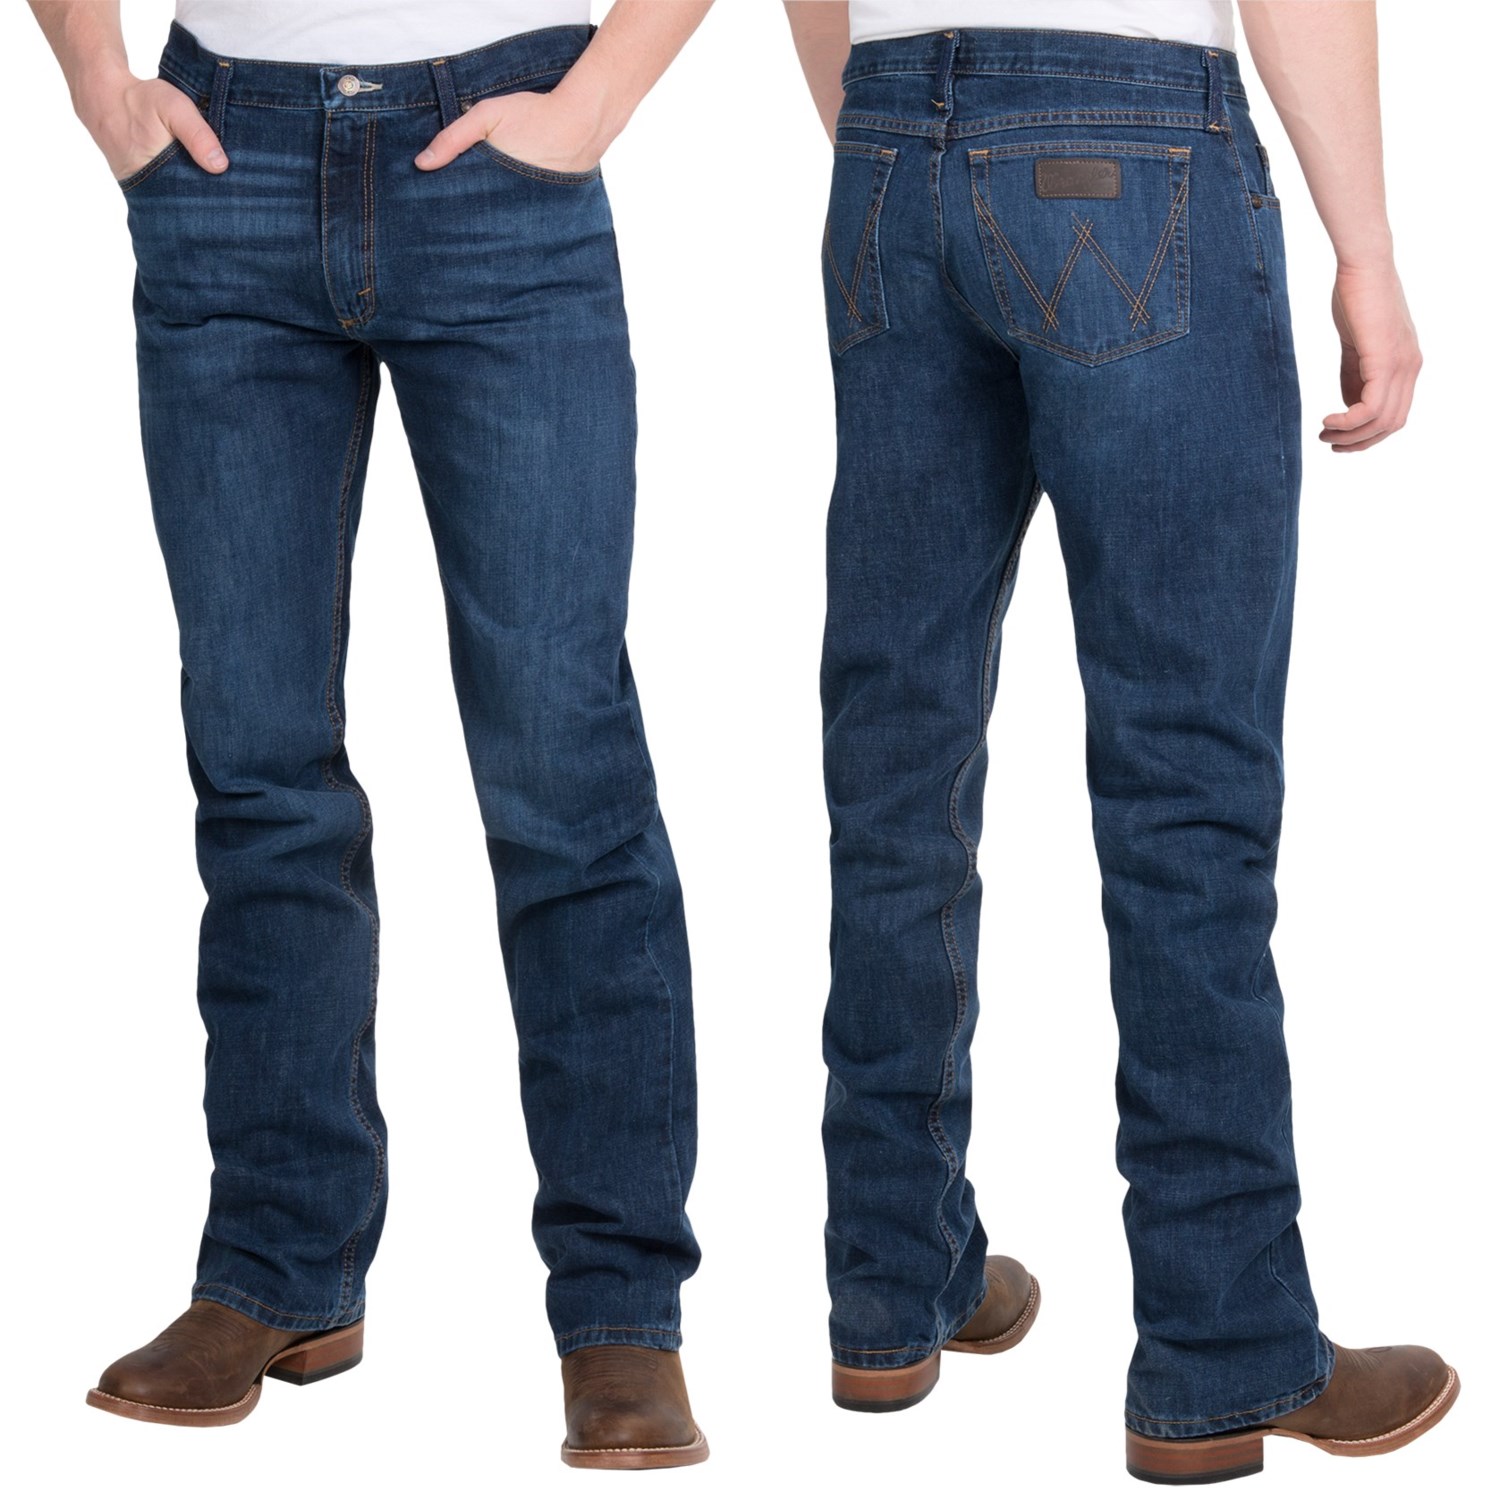 Wrangler 20X Competition Slim Jeans (For Men) - Save 64%